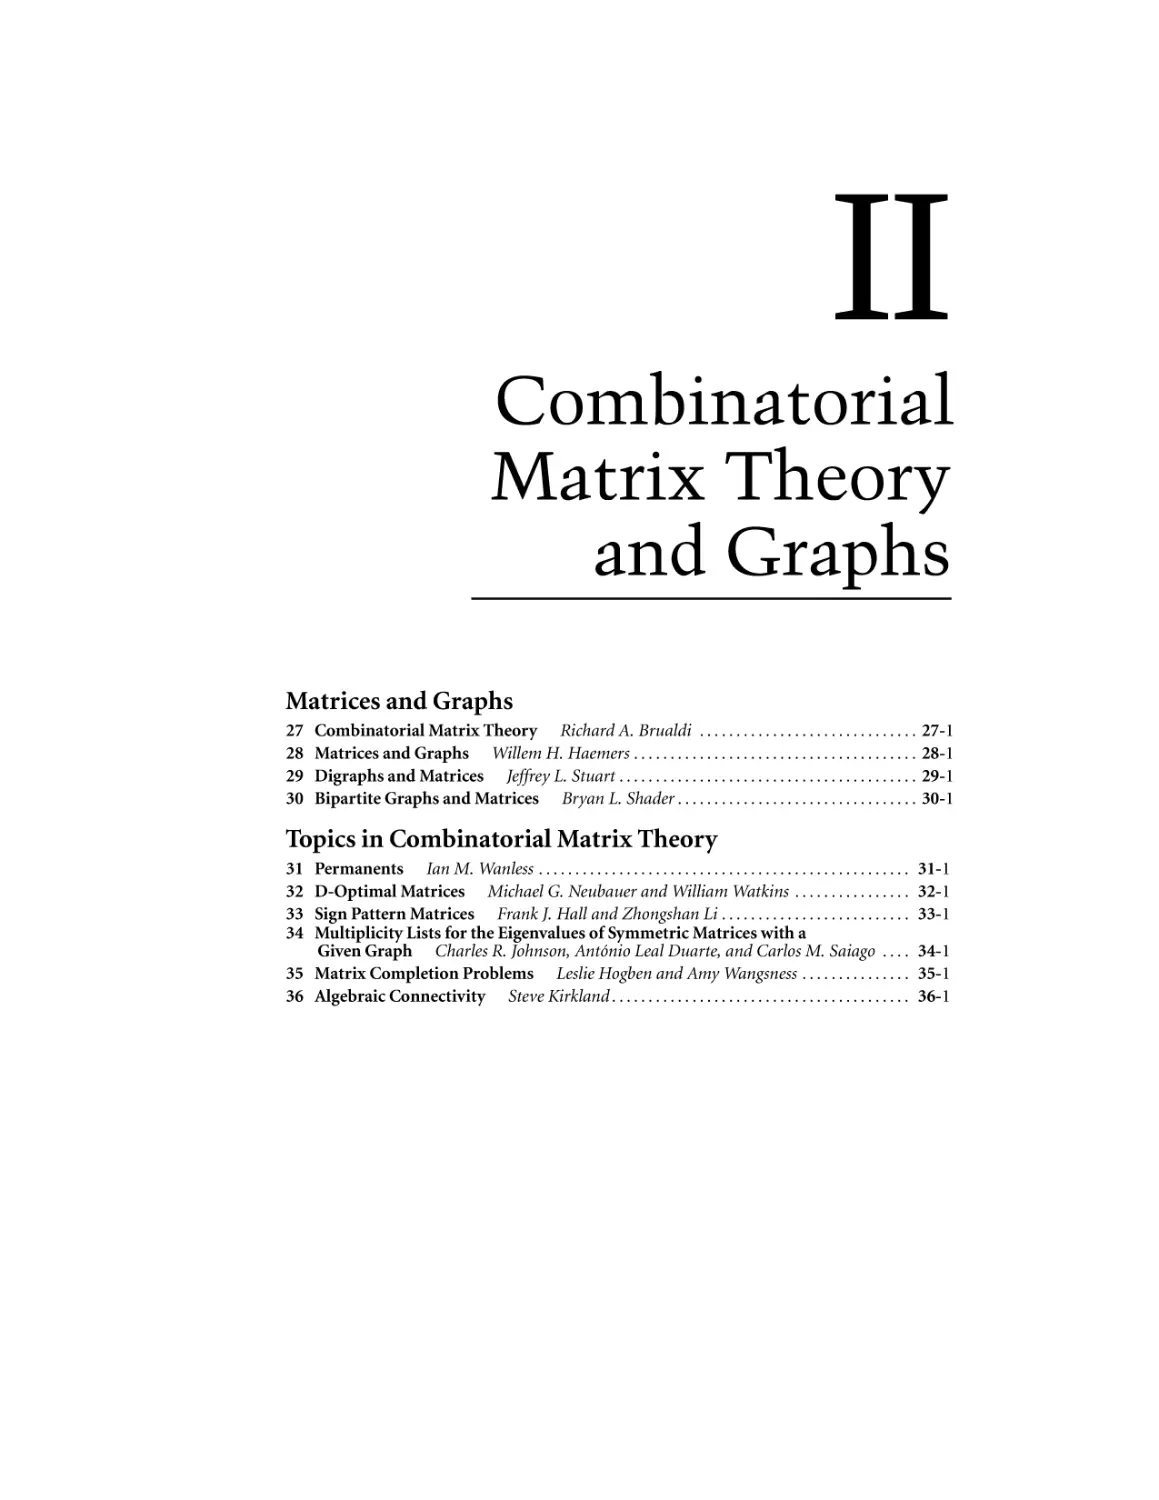 Part II. Combinatorial Matrix Theory and Graphs